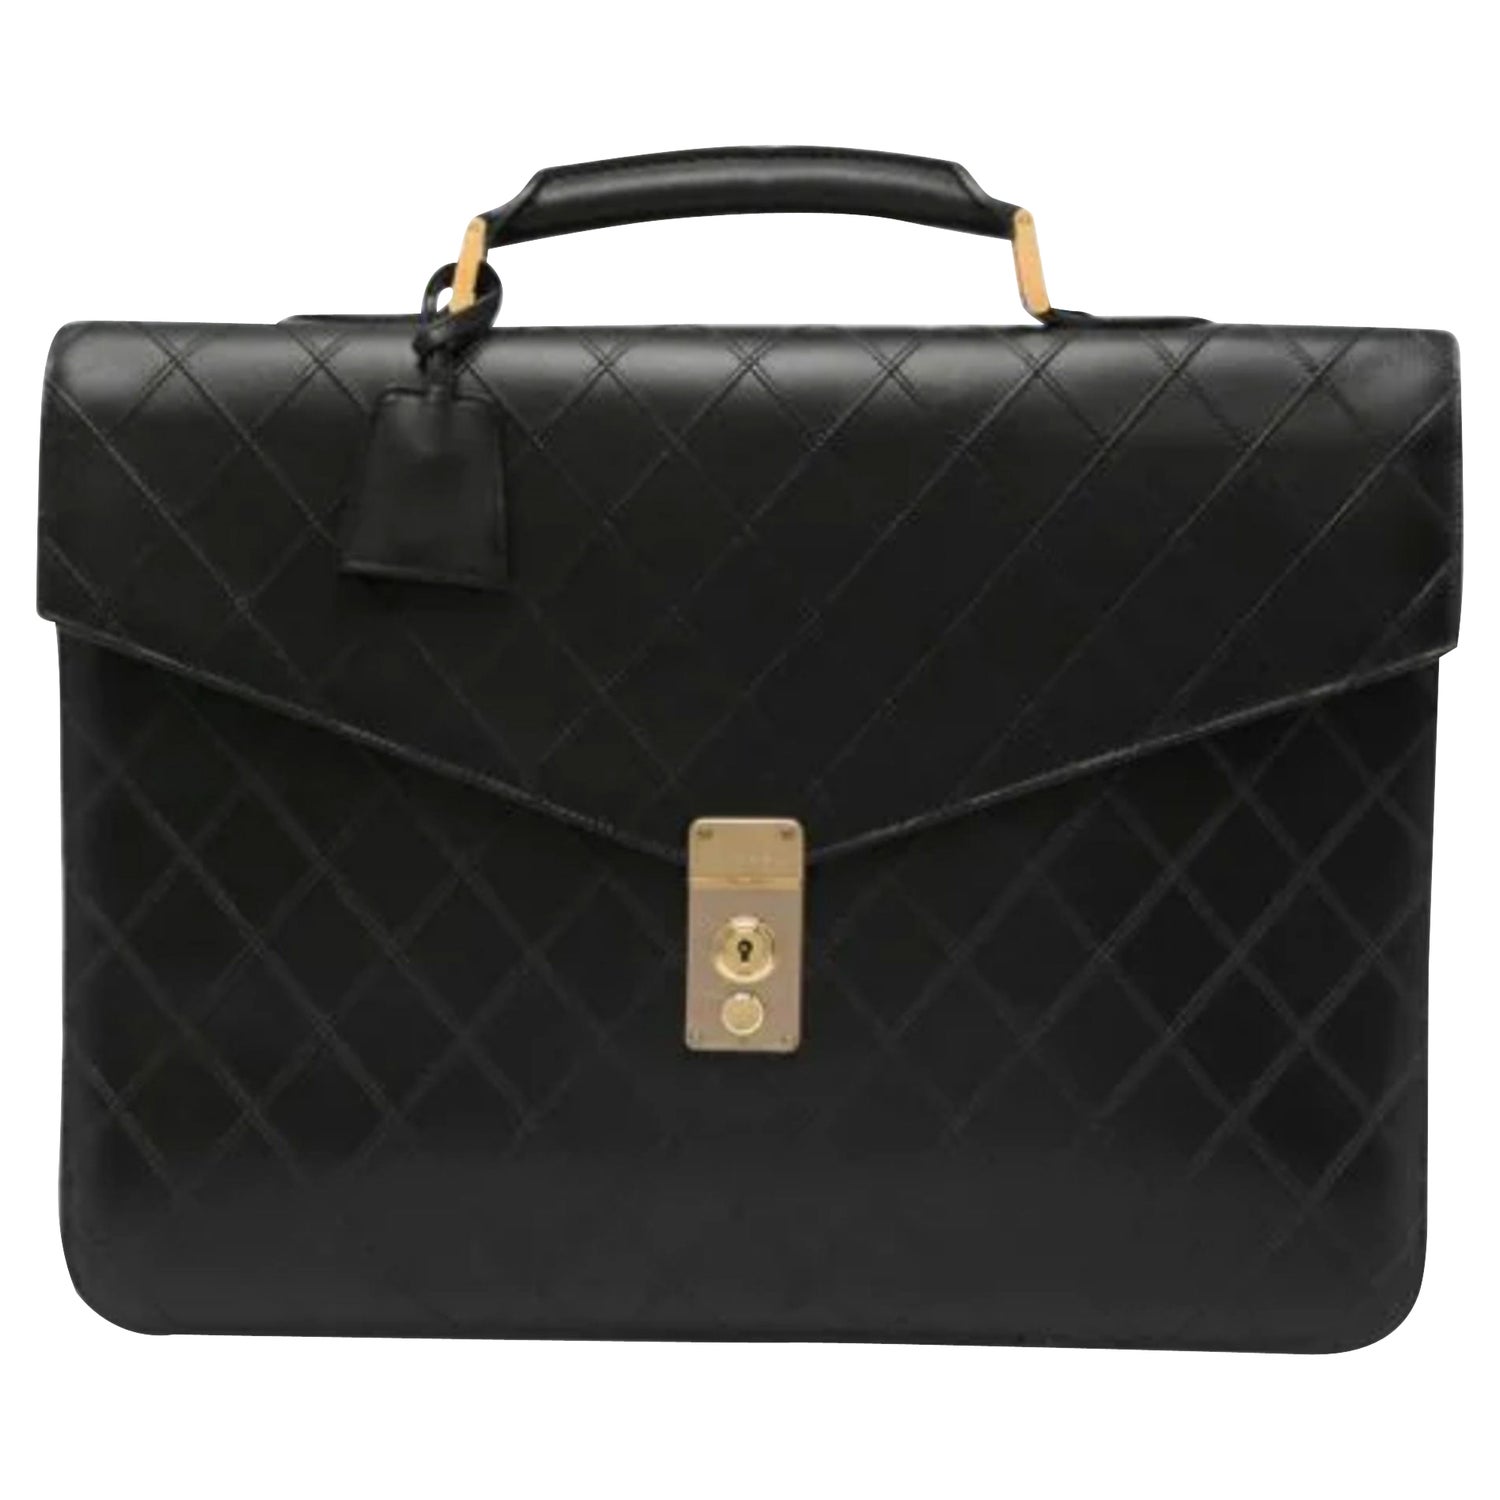 Chanel Vintage Quilted Briefcase - Black Briefcases, Bags - CHA859884